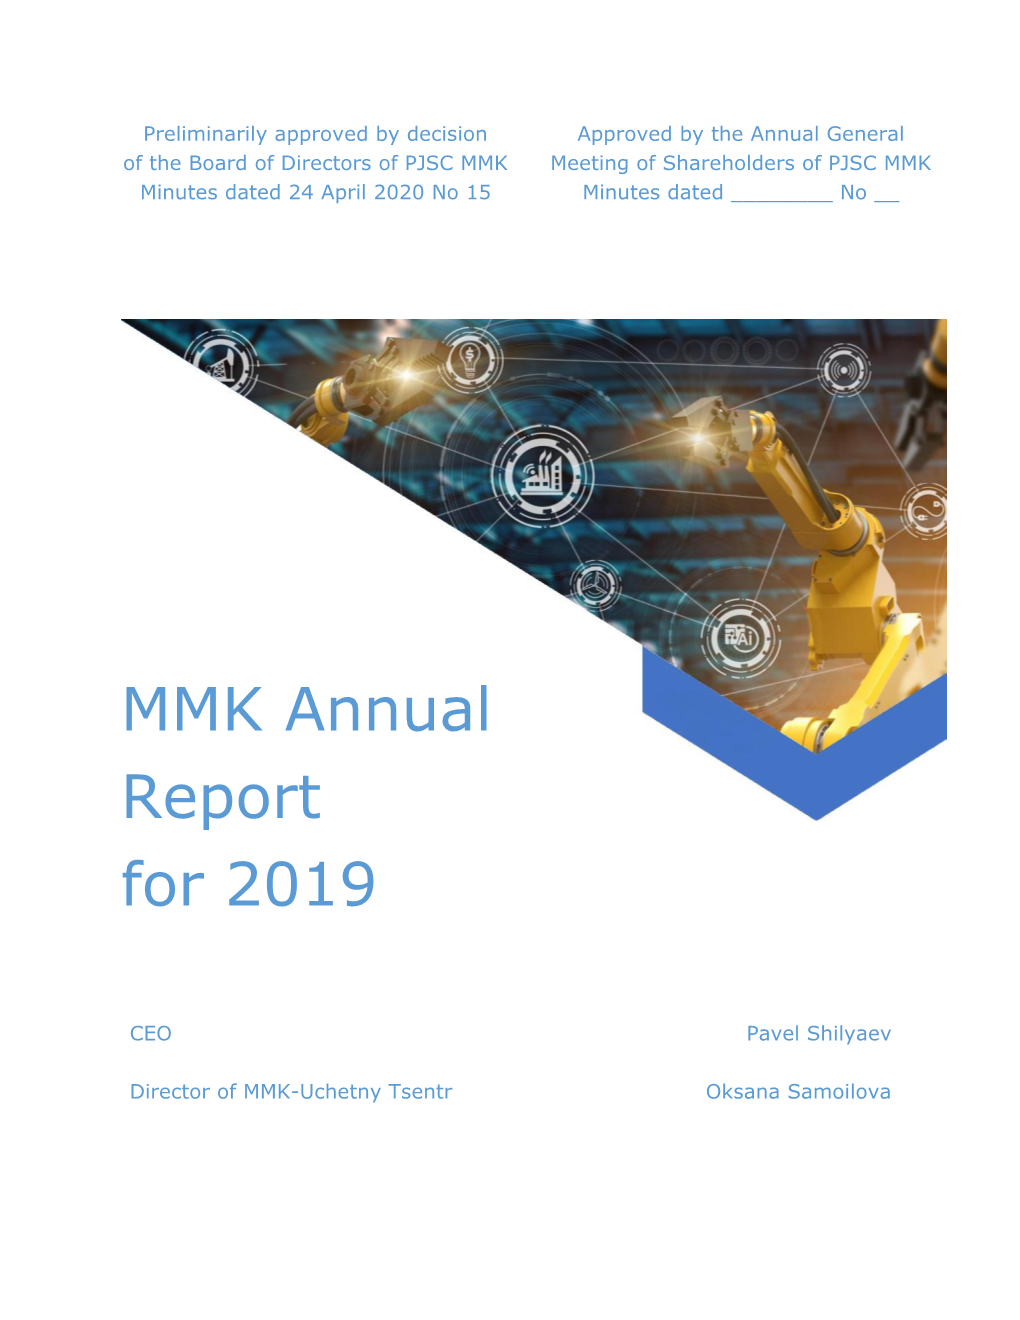 MMK Annual Report for 2019